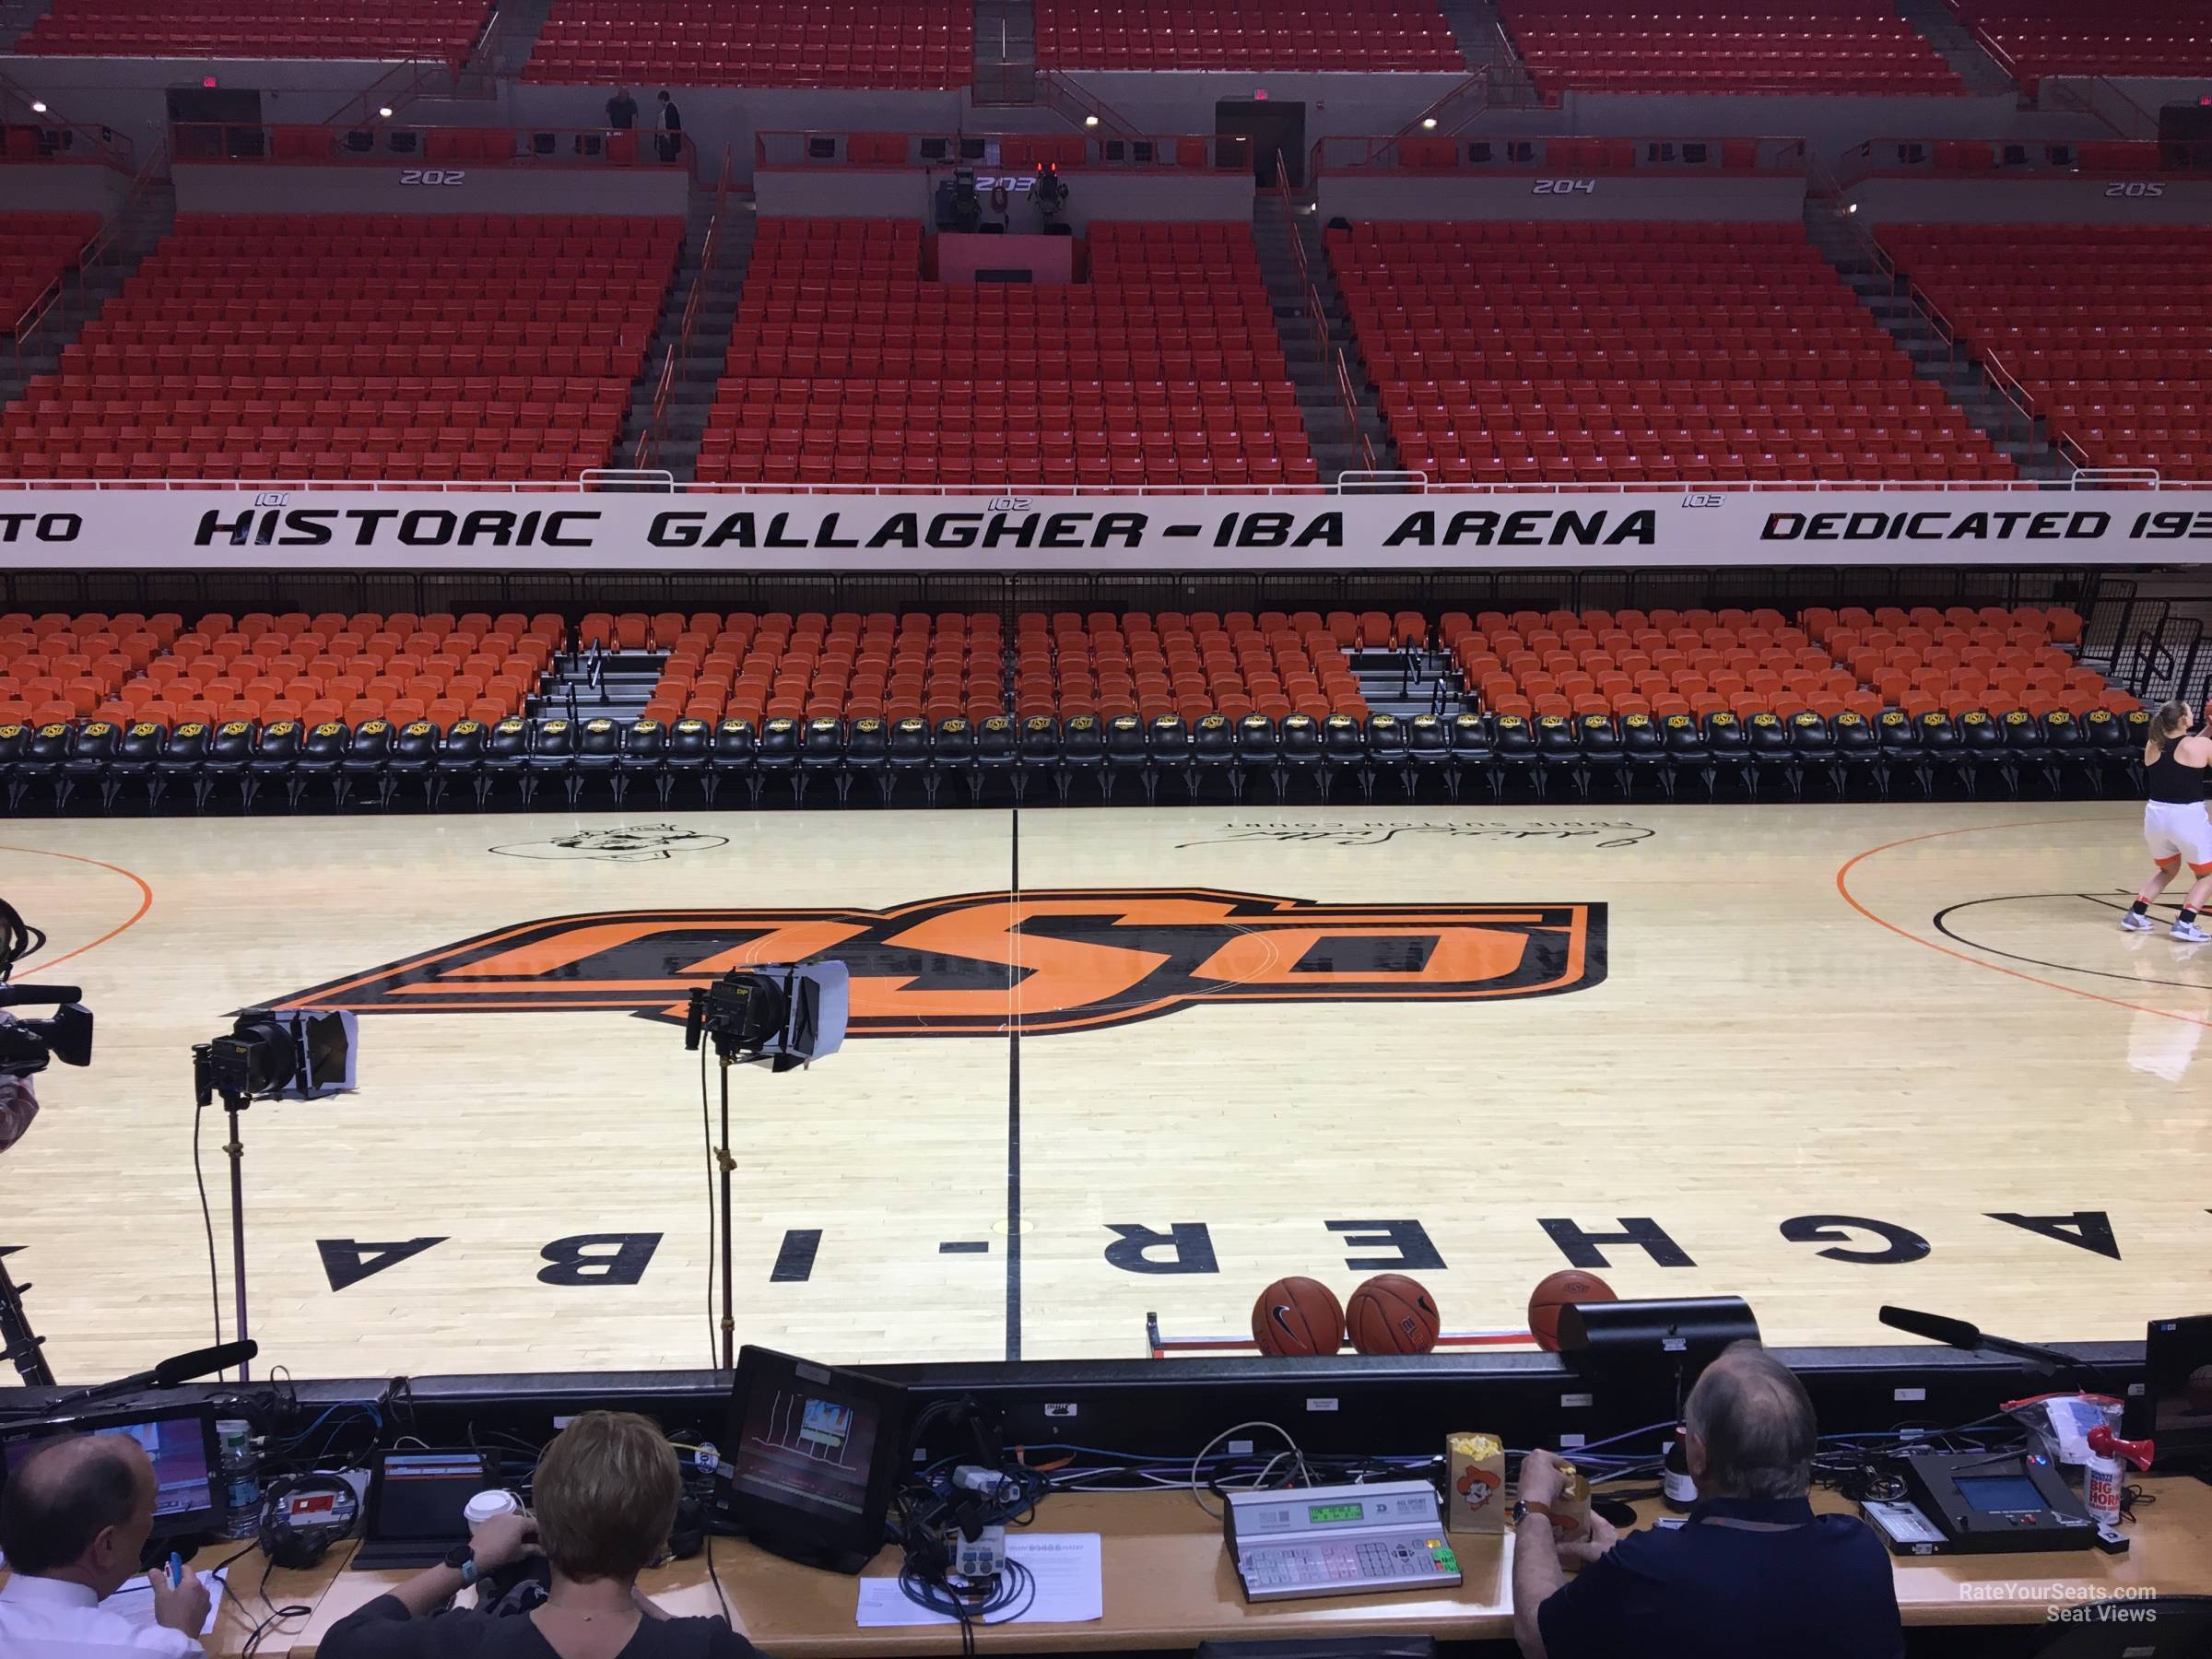 section 108, row 3 seat view  - gallagher-iba arena